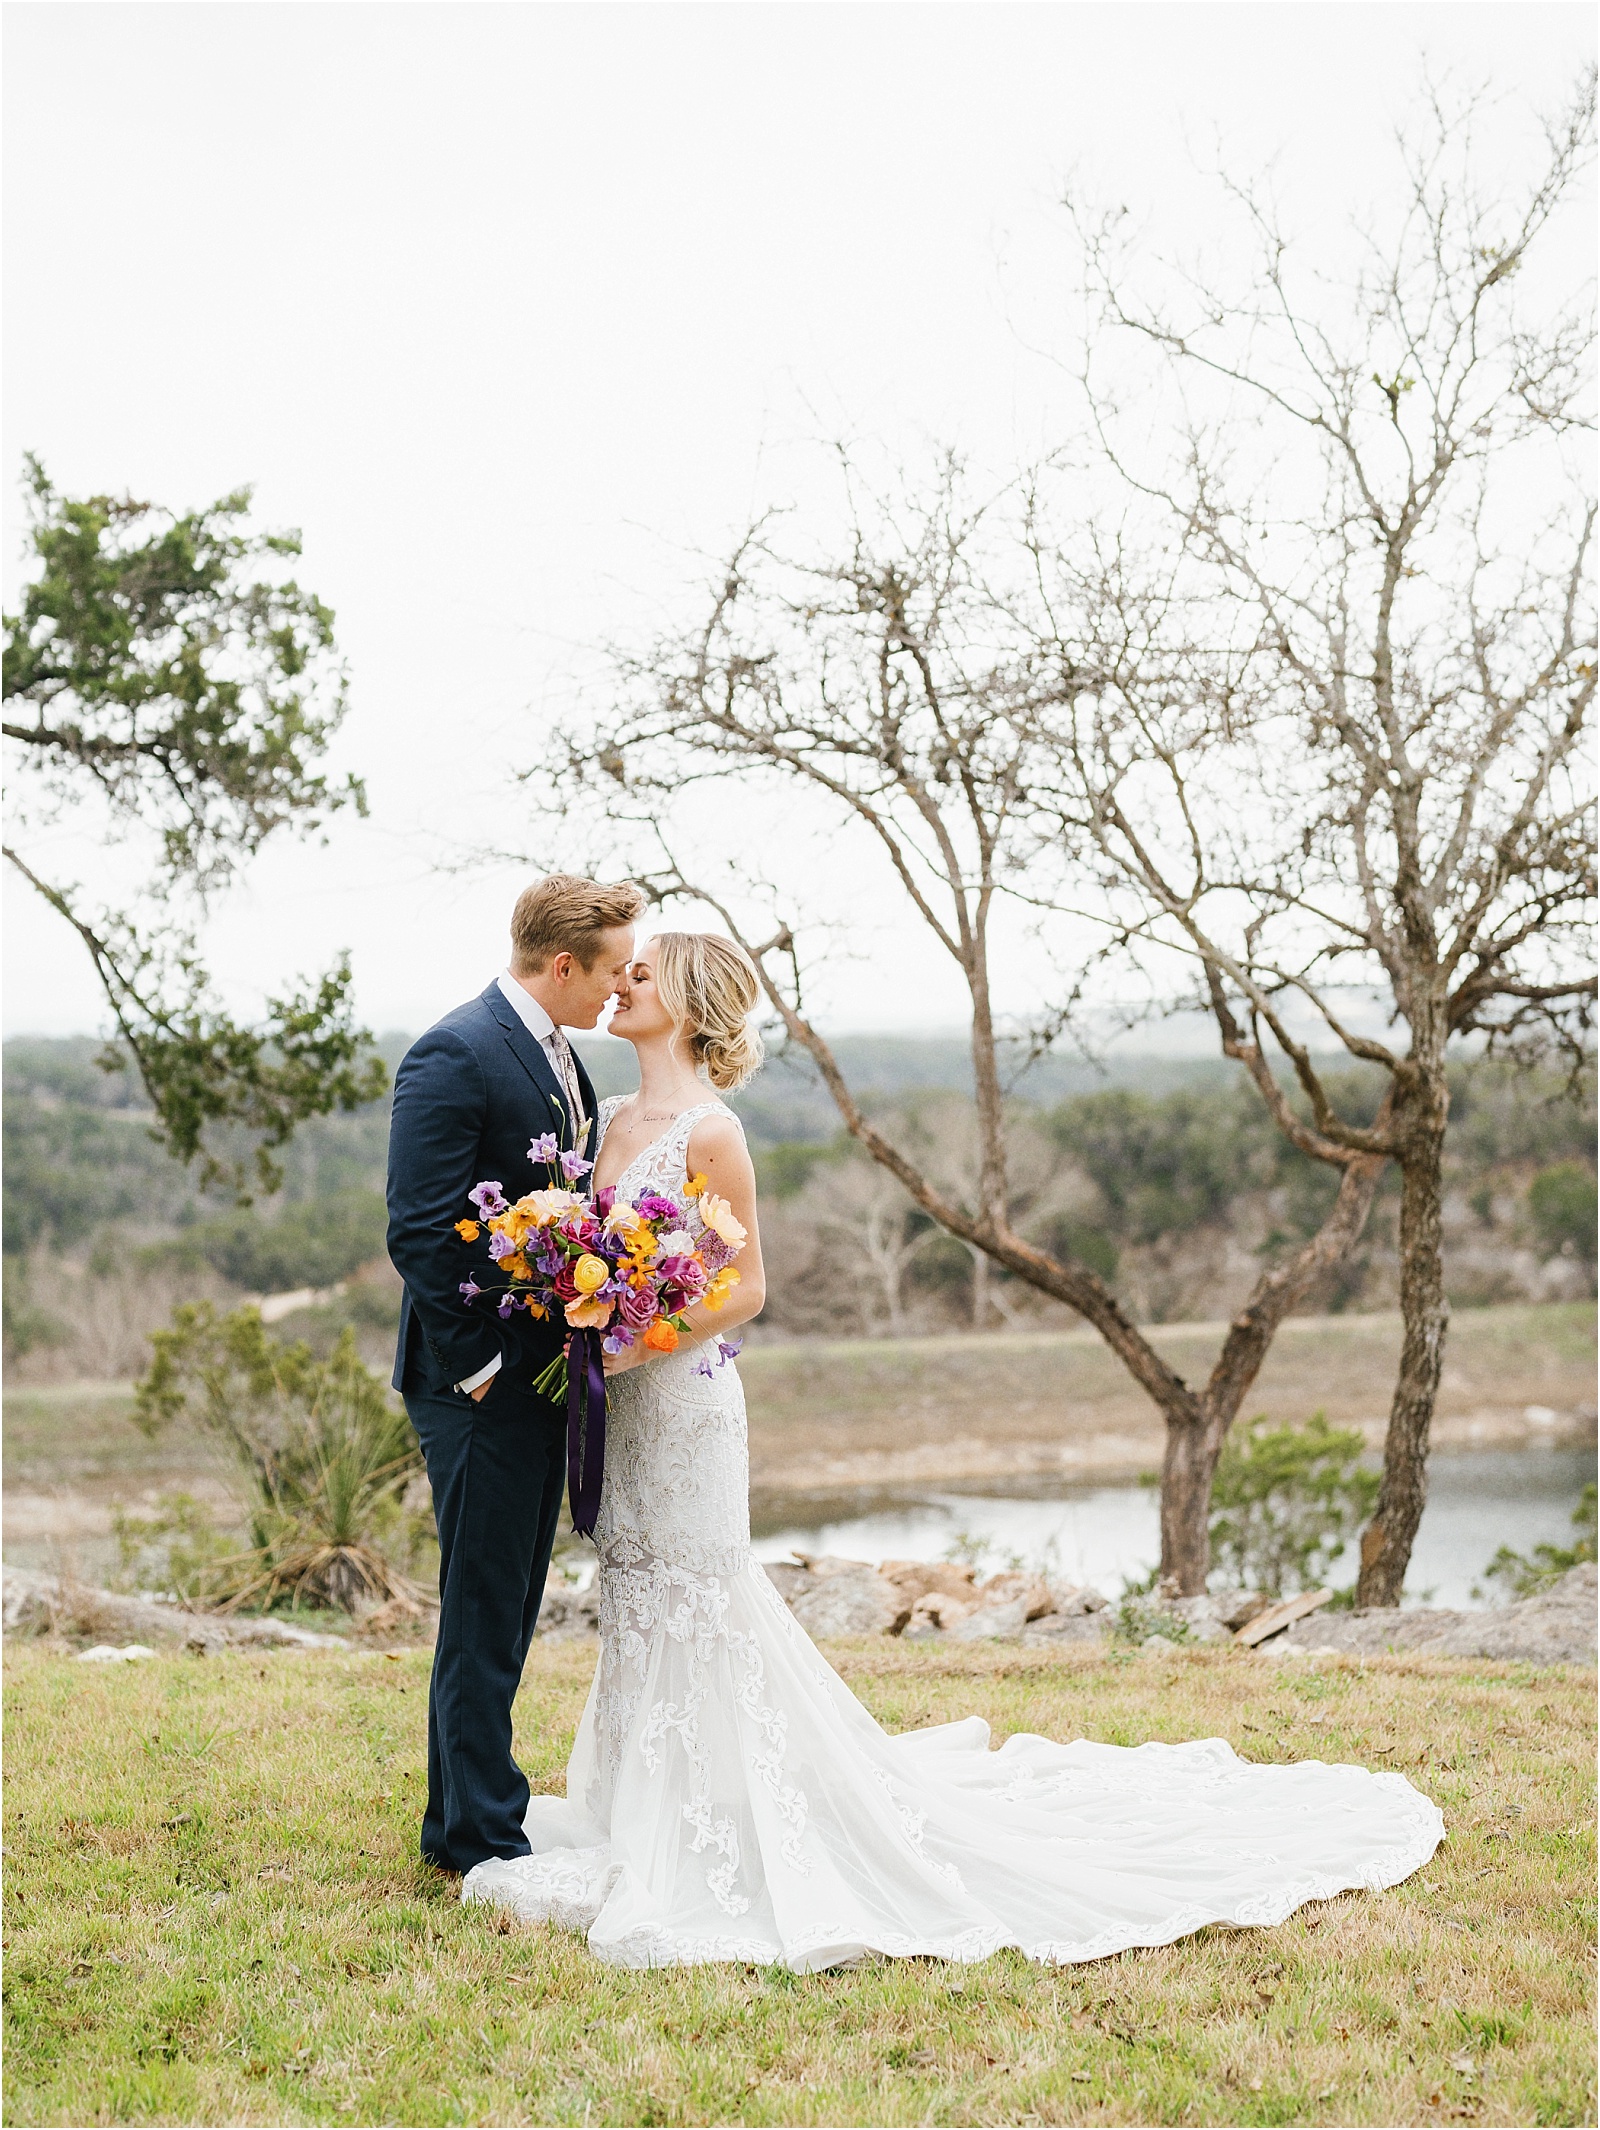 Bride and groom embracing over looking the lake at The Videre Estate.